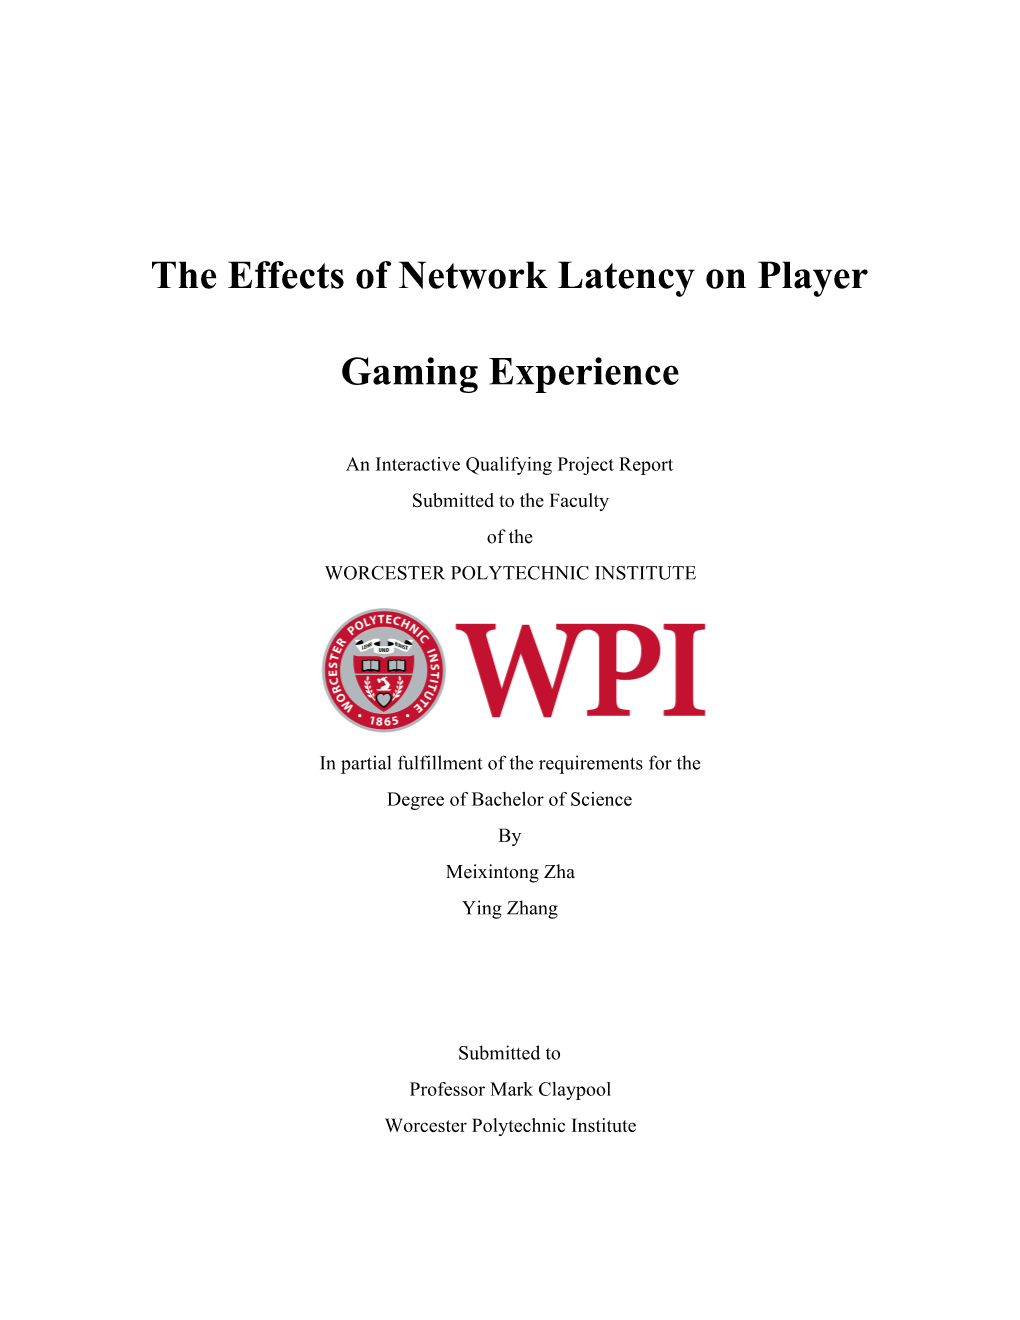 The Effects of Network Latency on Player Gaming Experience 0